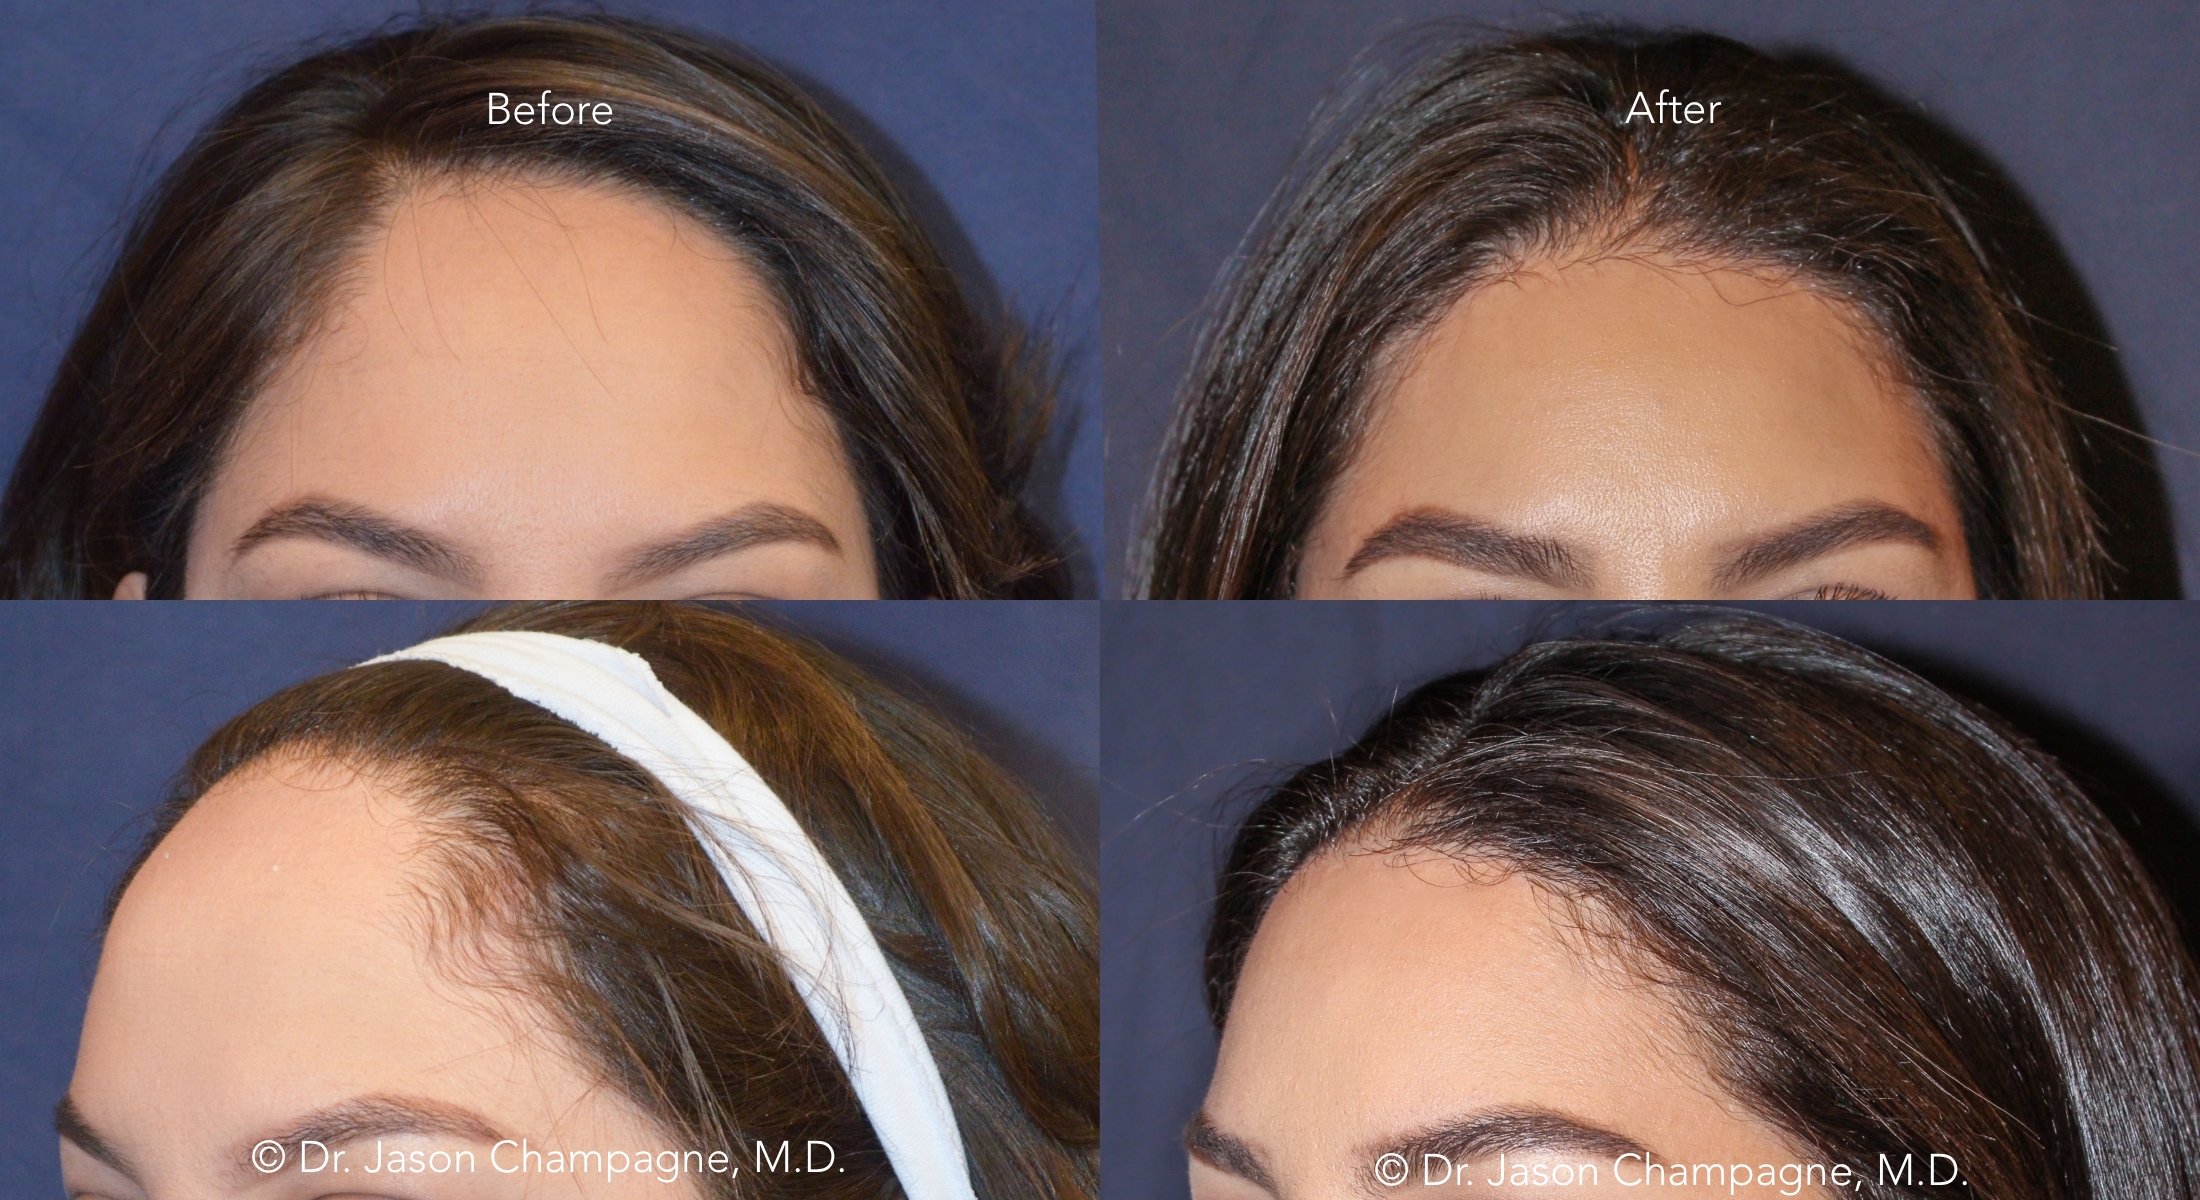 Hairline Lowering | Beverly Hills Plastic Surgeon - Dr. Jason Champagne